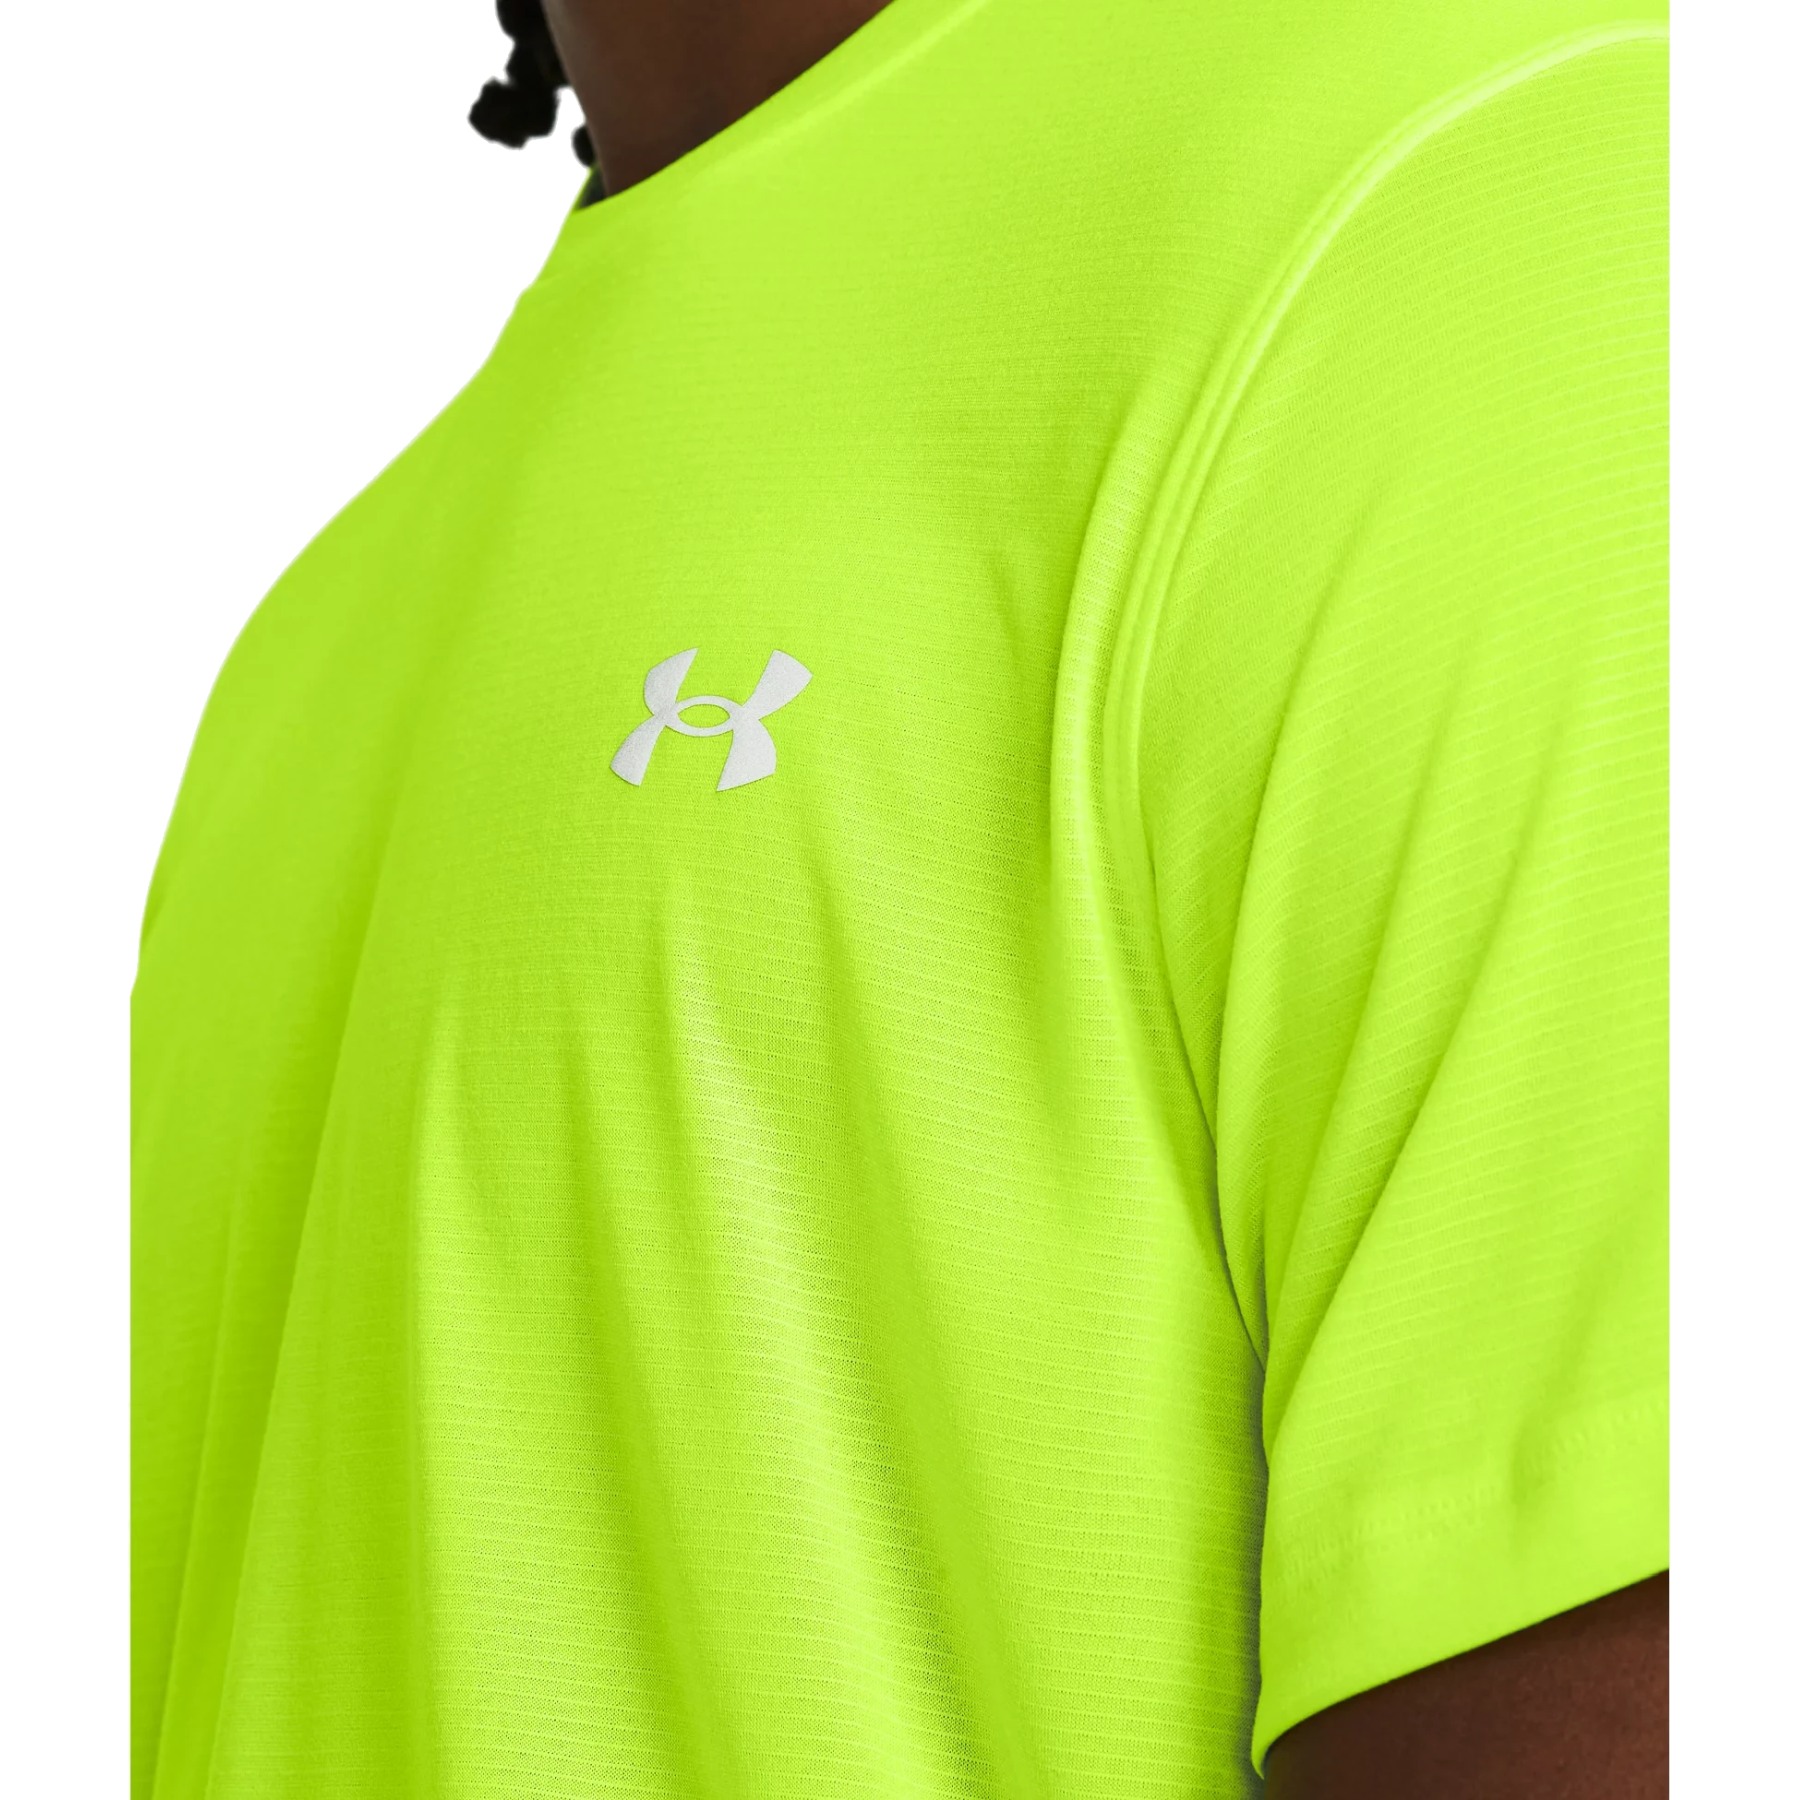 Under Armour UA OutRun The Storm Jacket Men - High-Vis Yellow